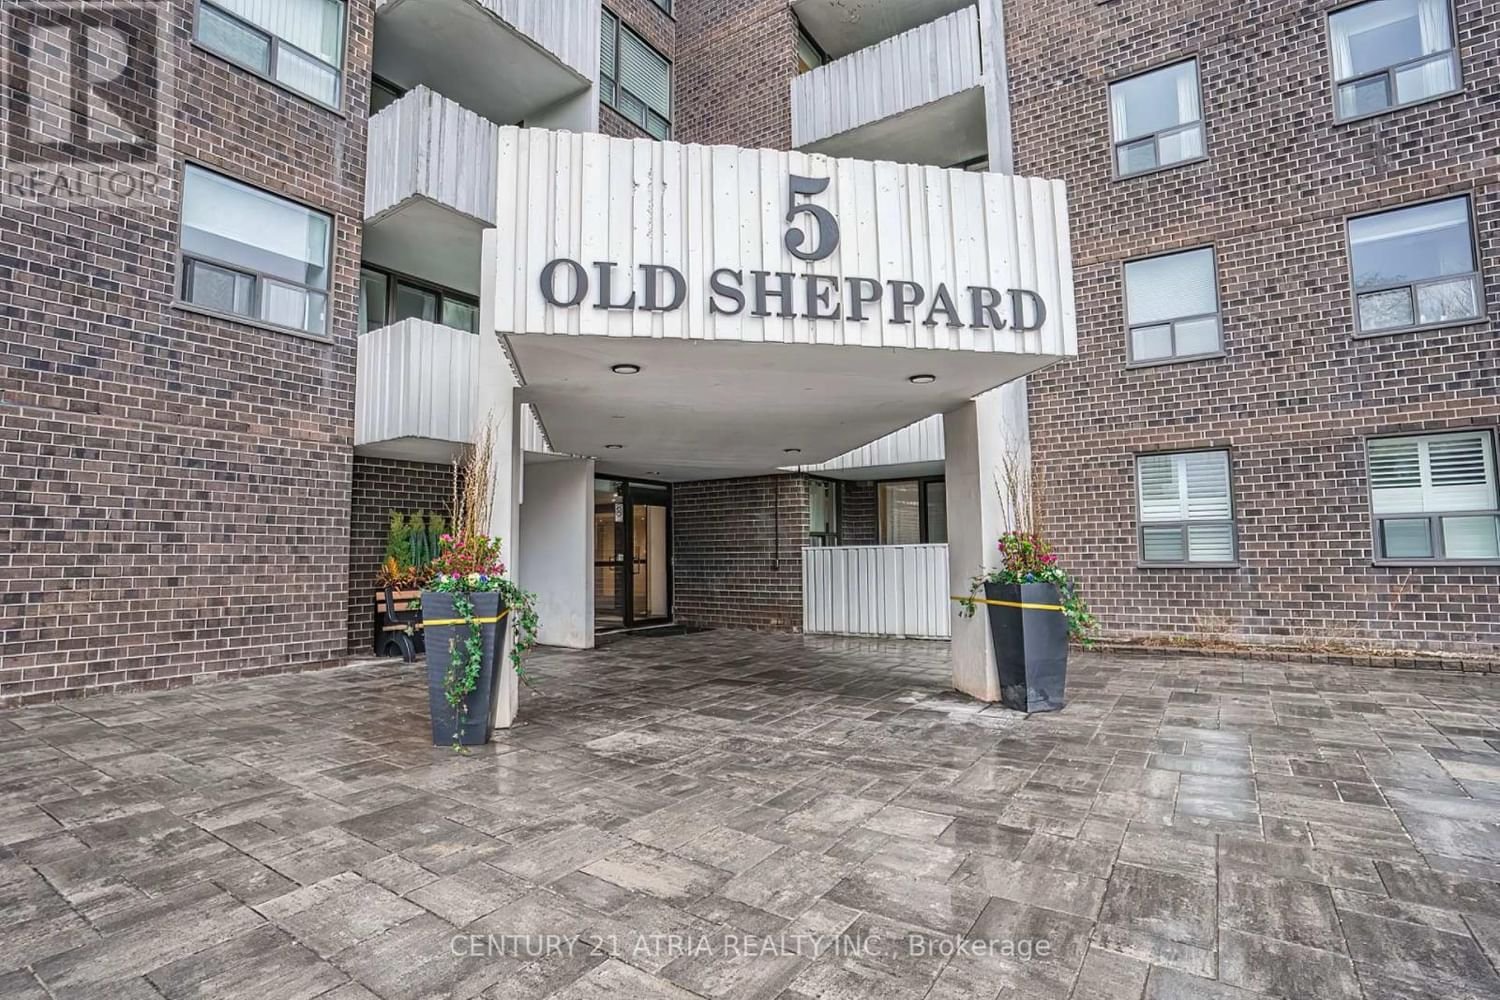 1009 - 5 OLD SHEPPARD AVENUE Image 2